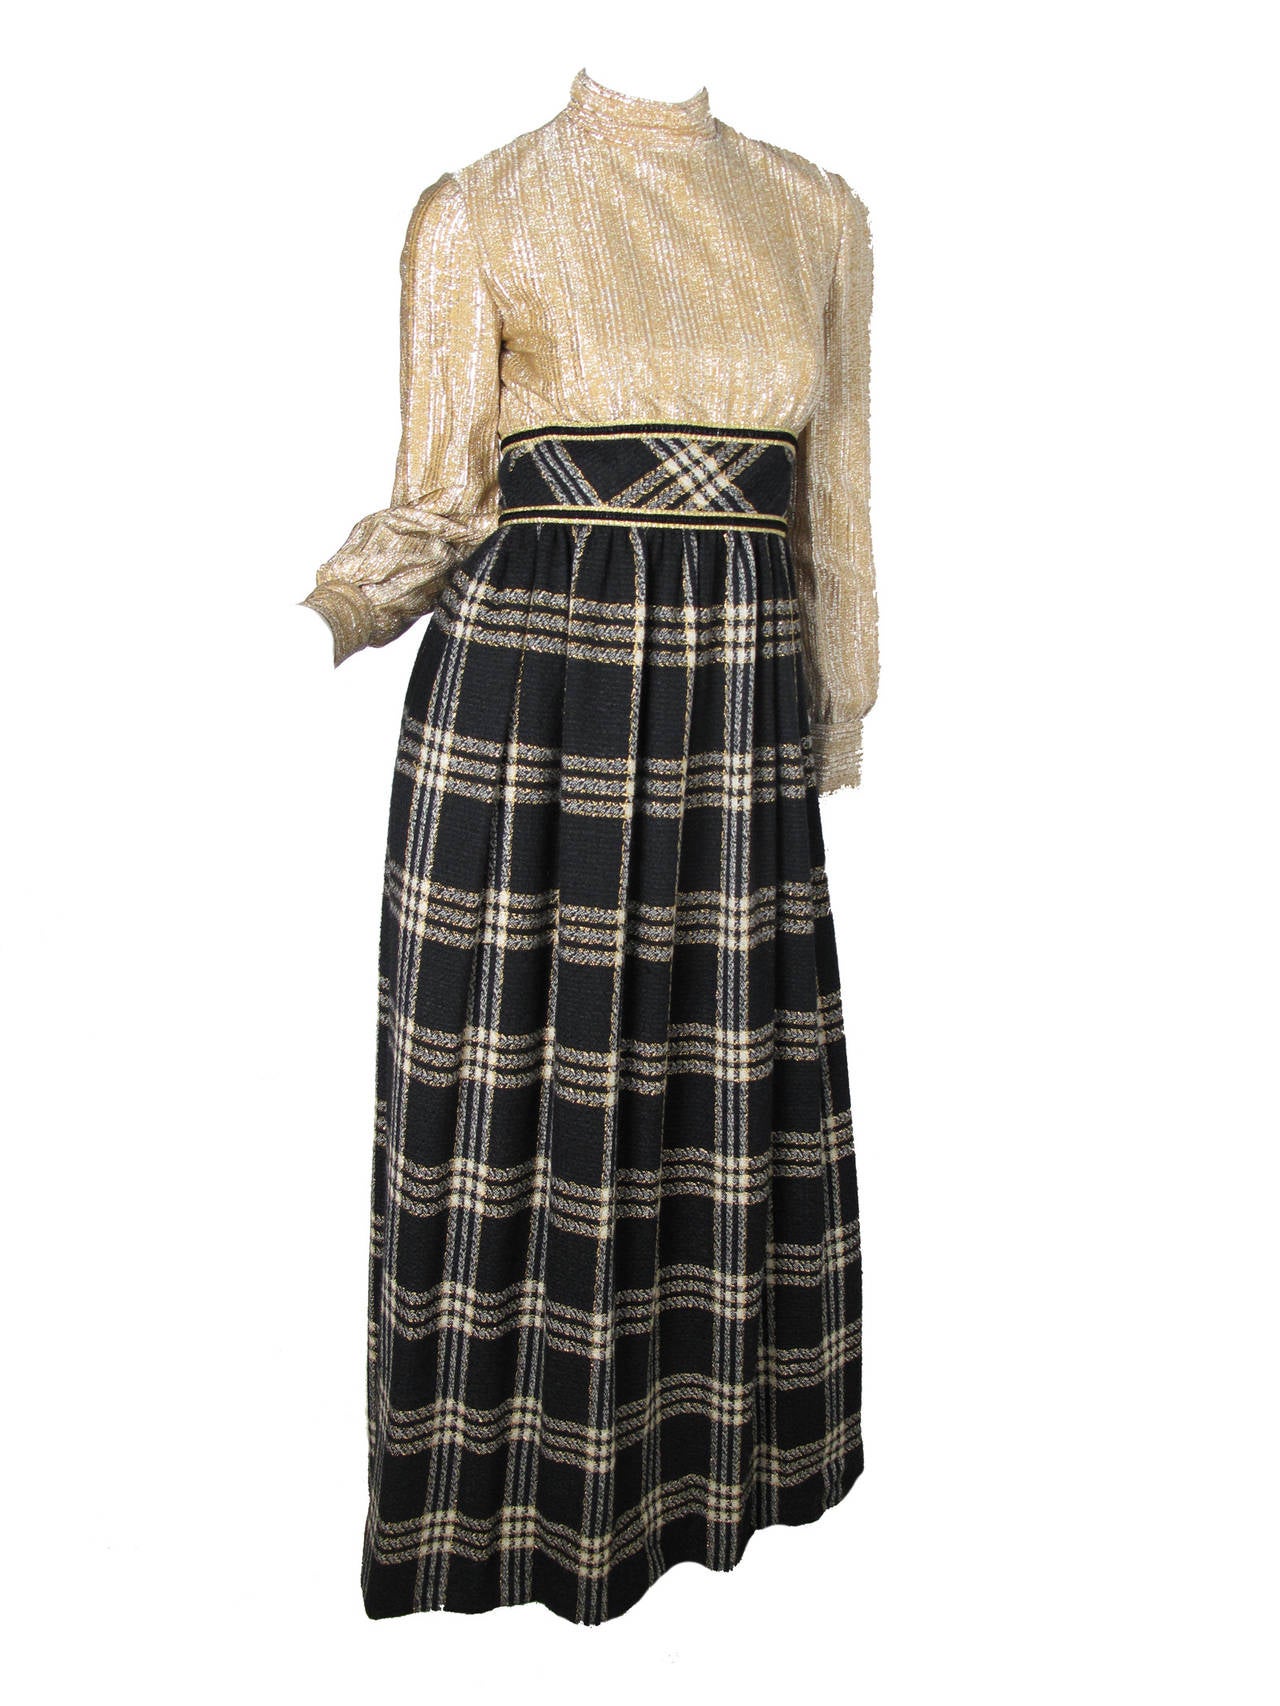 1970s Mollie Parnis Boutique wall plaid gown with gold lame bodice. With cropped herringbone jacket.   Condition: Very good, few pulls in lame. 

Size 4

Gown: 34